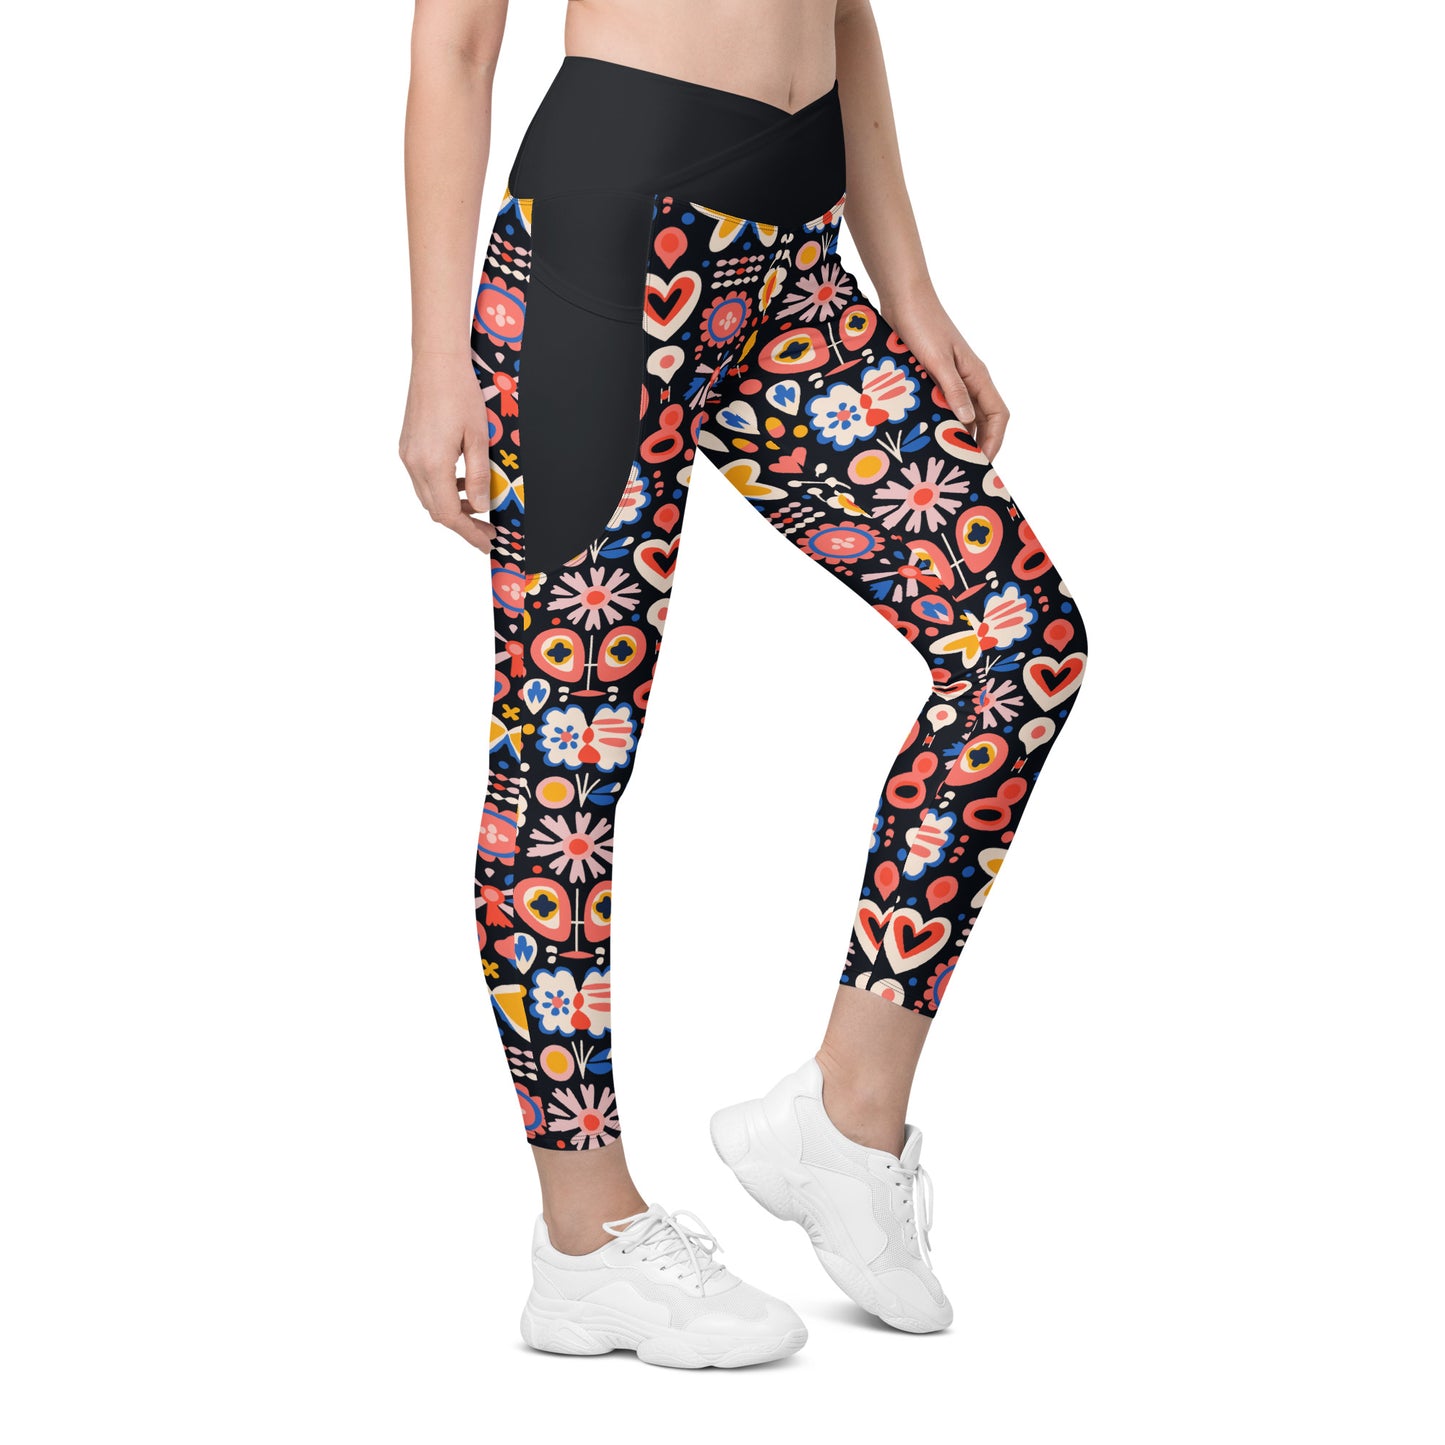 Alpen Nacht Crossover Waist 7/8 Recycled Yoga Leggings / Yoga Pants with Pockets